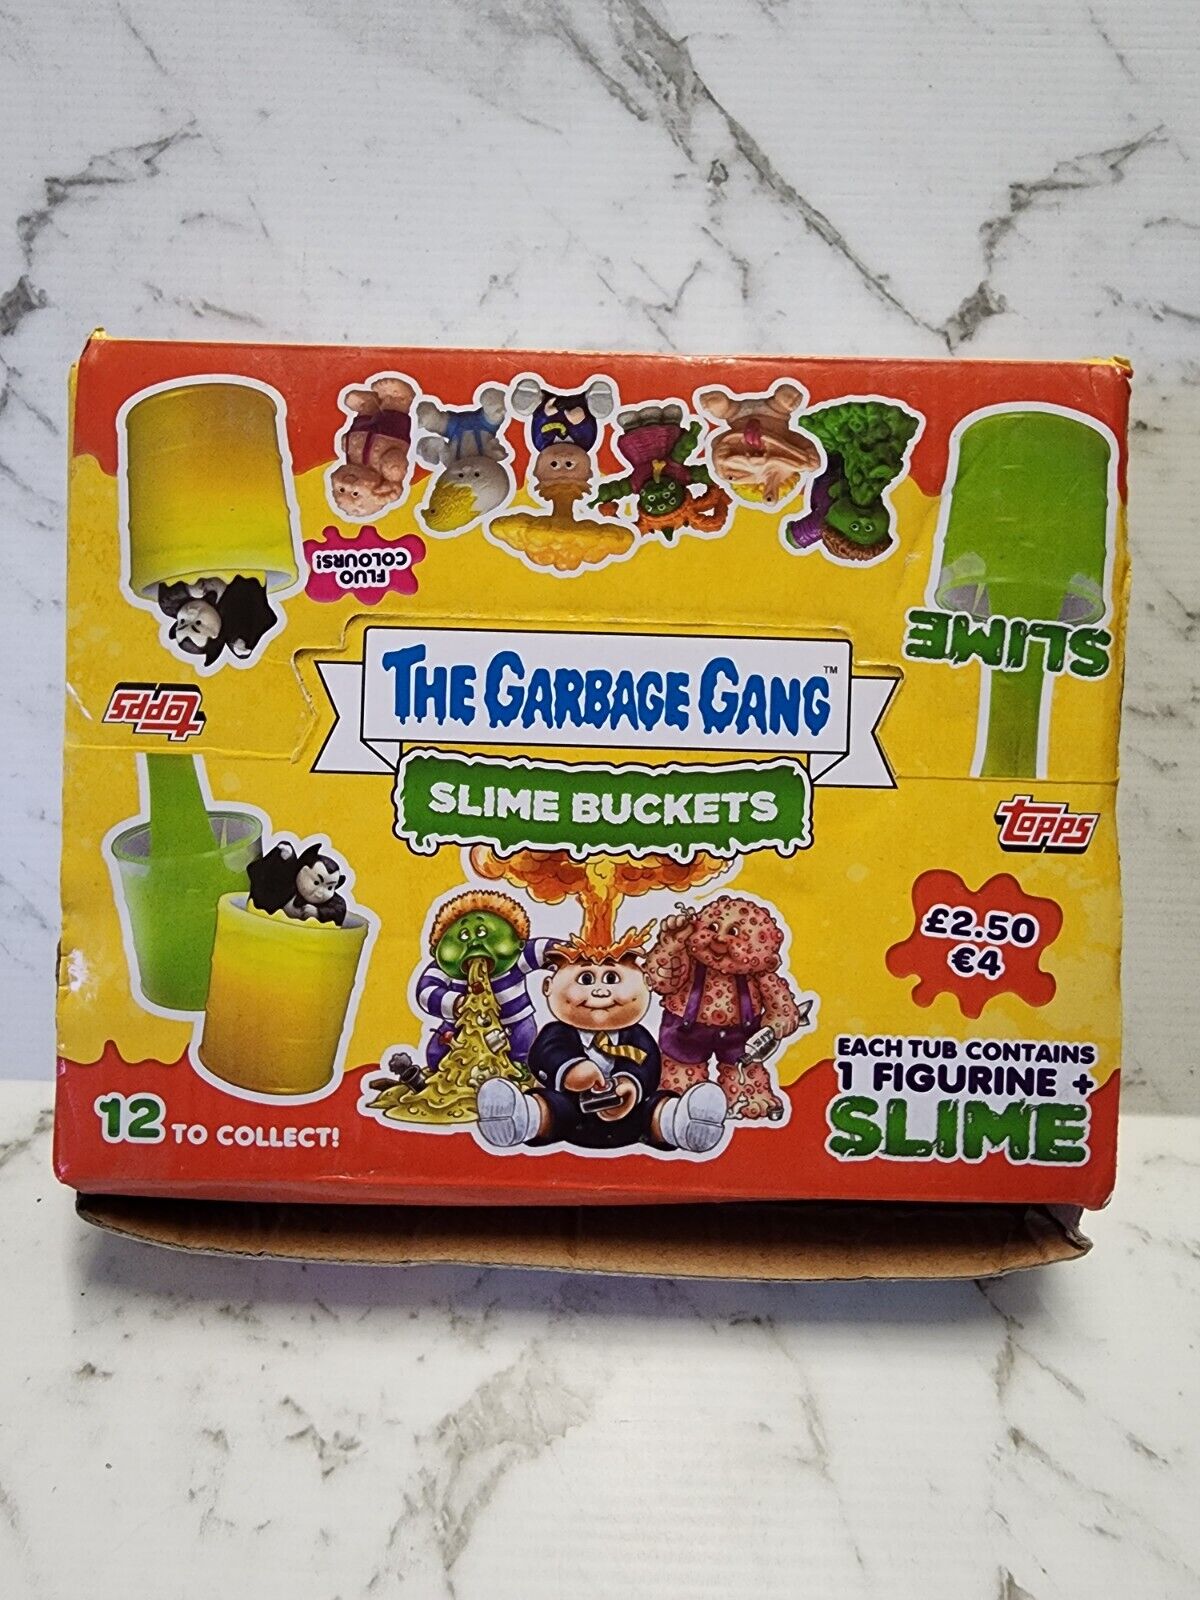 The Garbage Gang Slime Buckets Full Box 12ct GPK Garbage Pail Kids New Old Stock